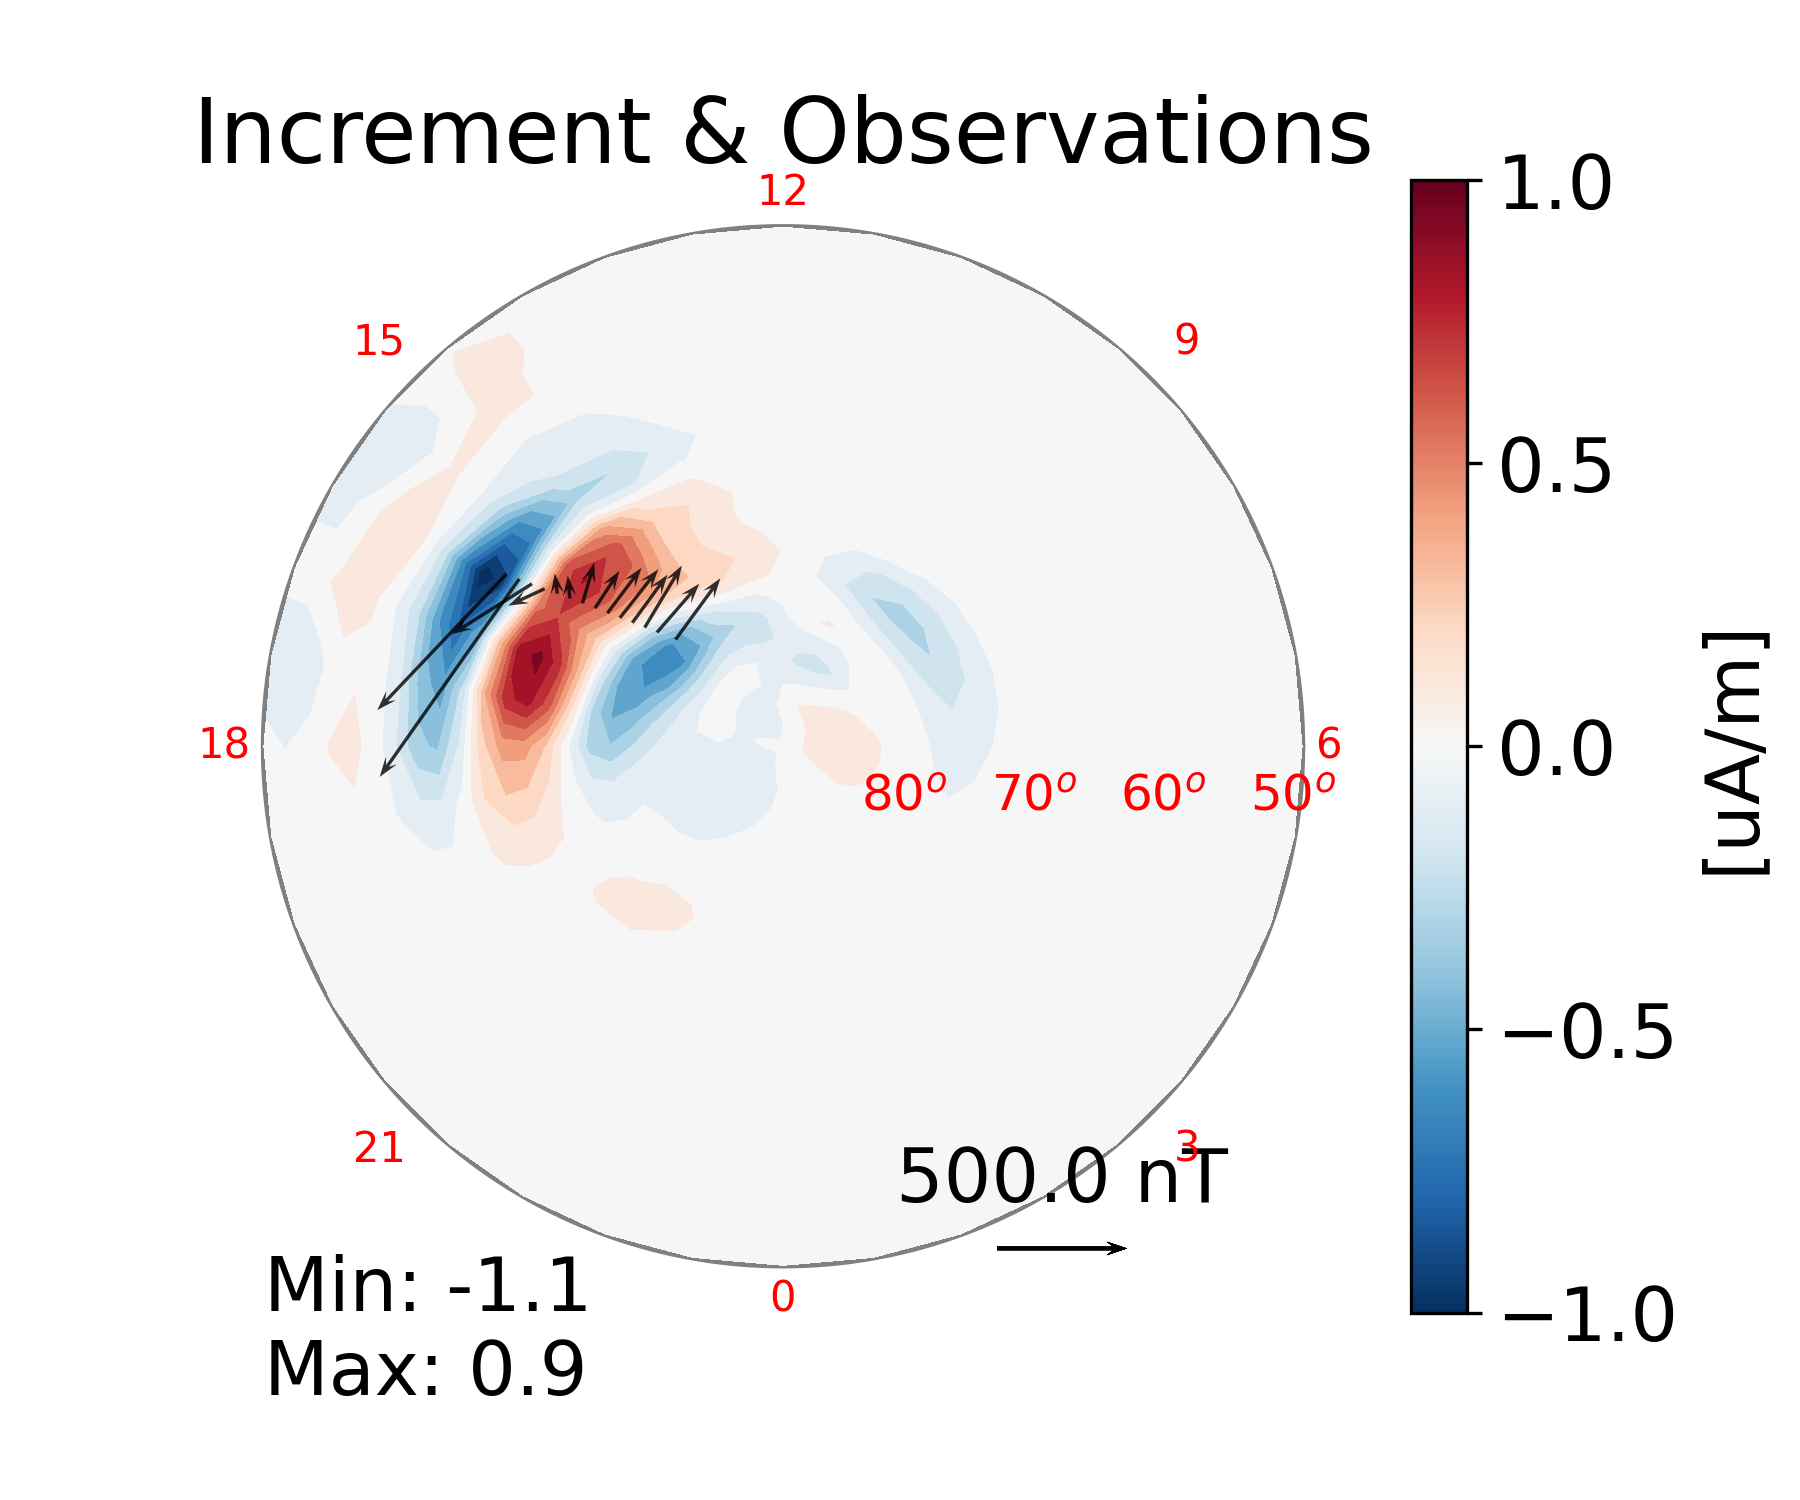 Here, Iridium magnetic field perturbations are plotted as well as estimated field-aligned currents. These generated field-aligned currents are the contribution of the Iridium data to the creation of AMGeO’s field-aligned current map.